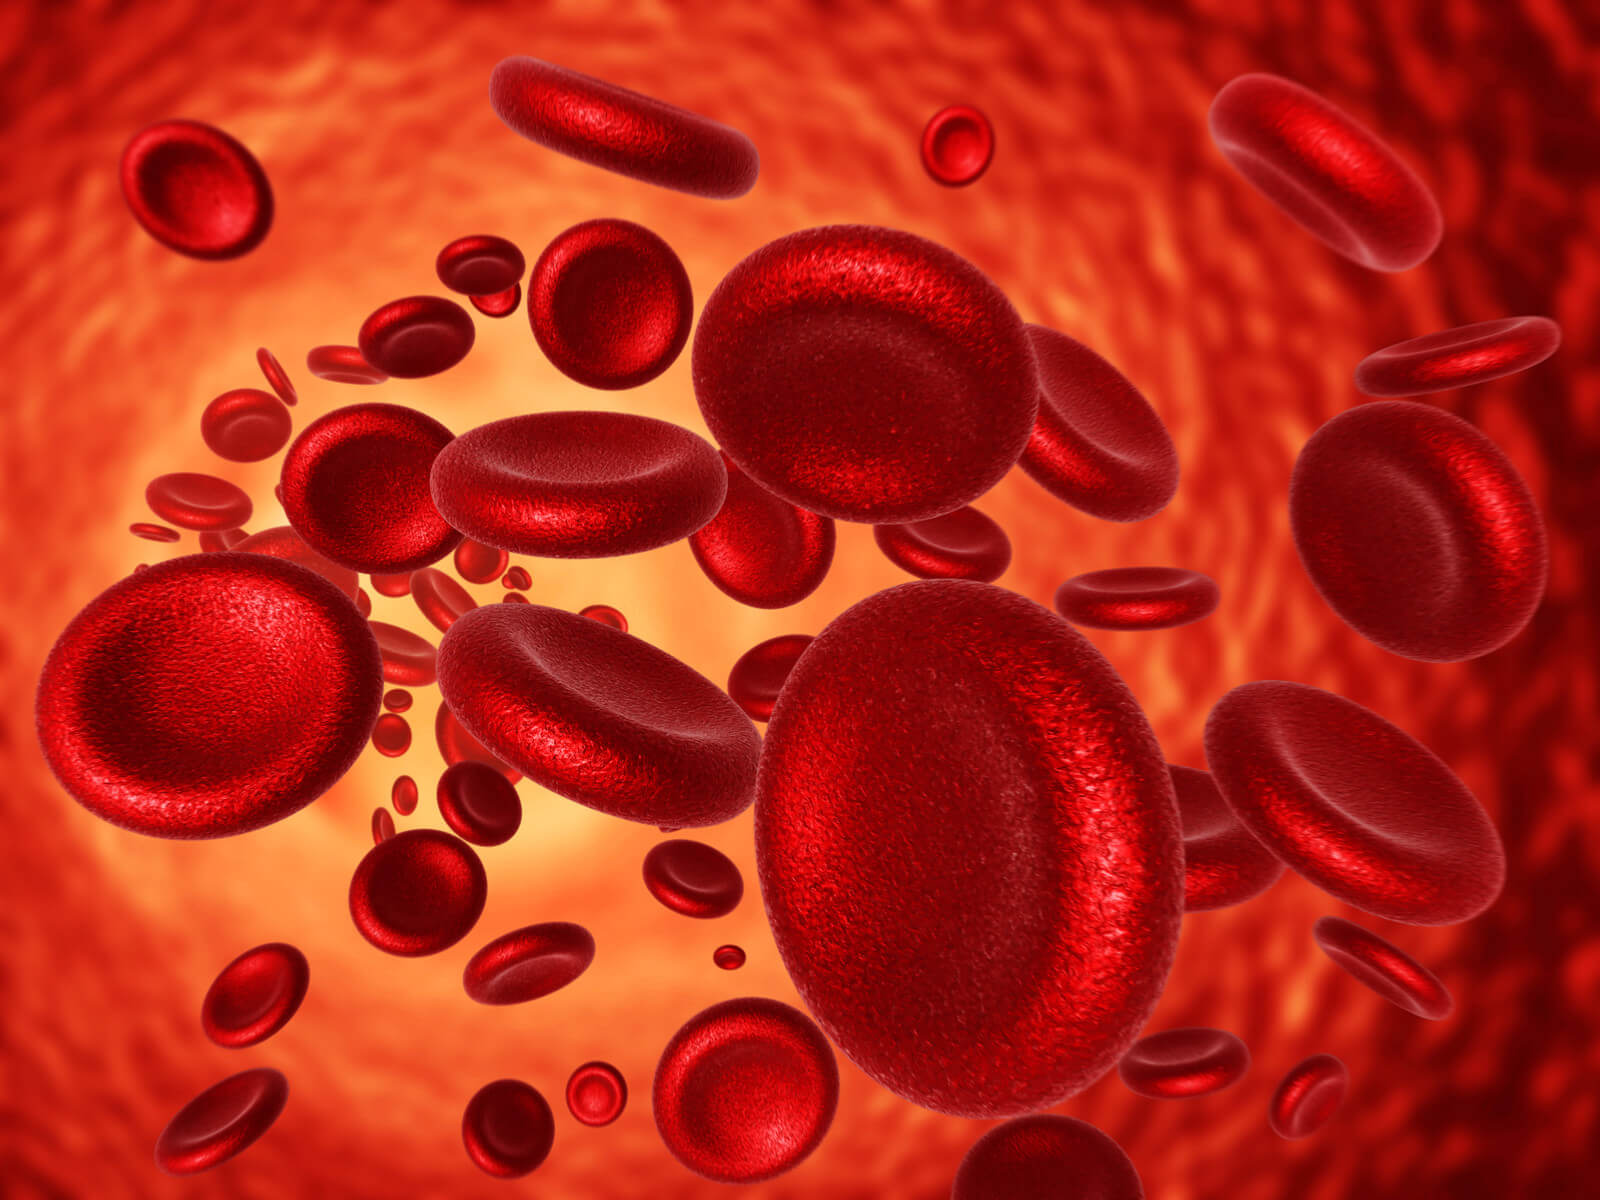 How Does Anemia Impact Your Health, Fitness and Performance